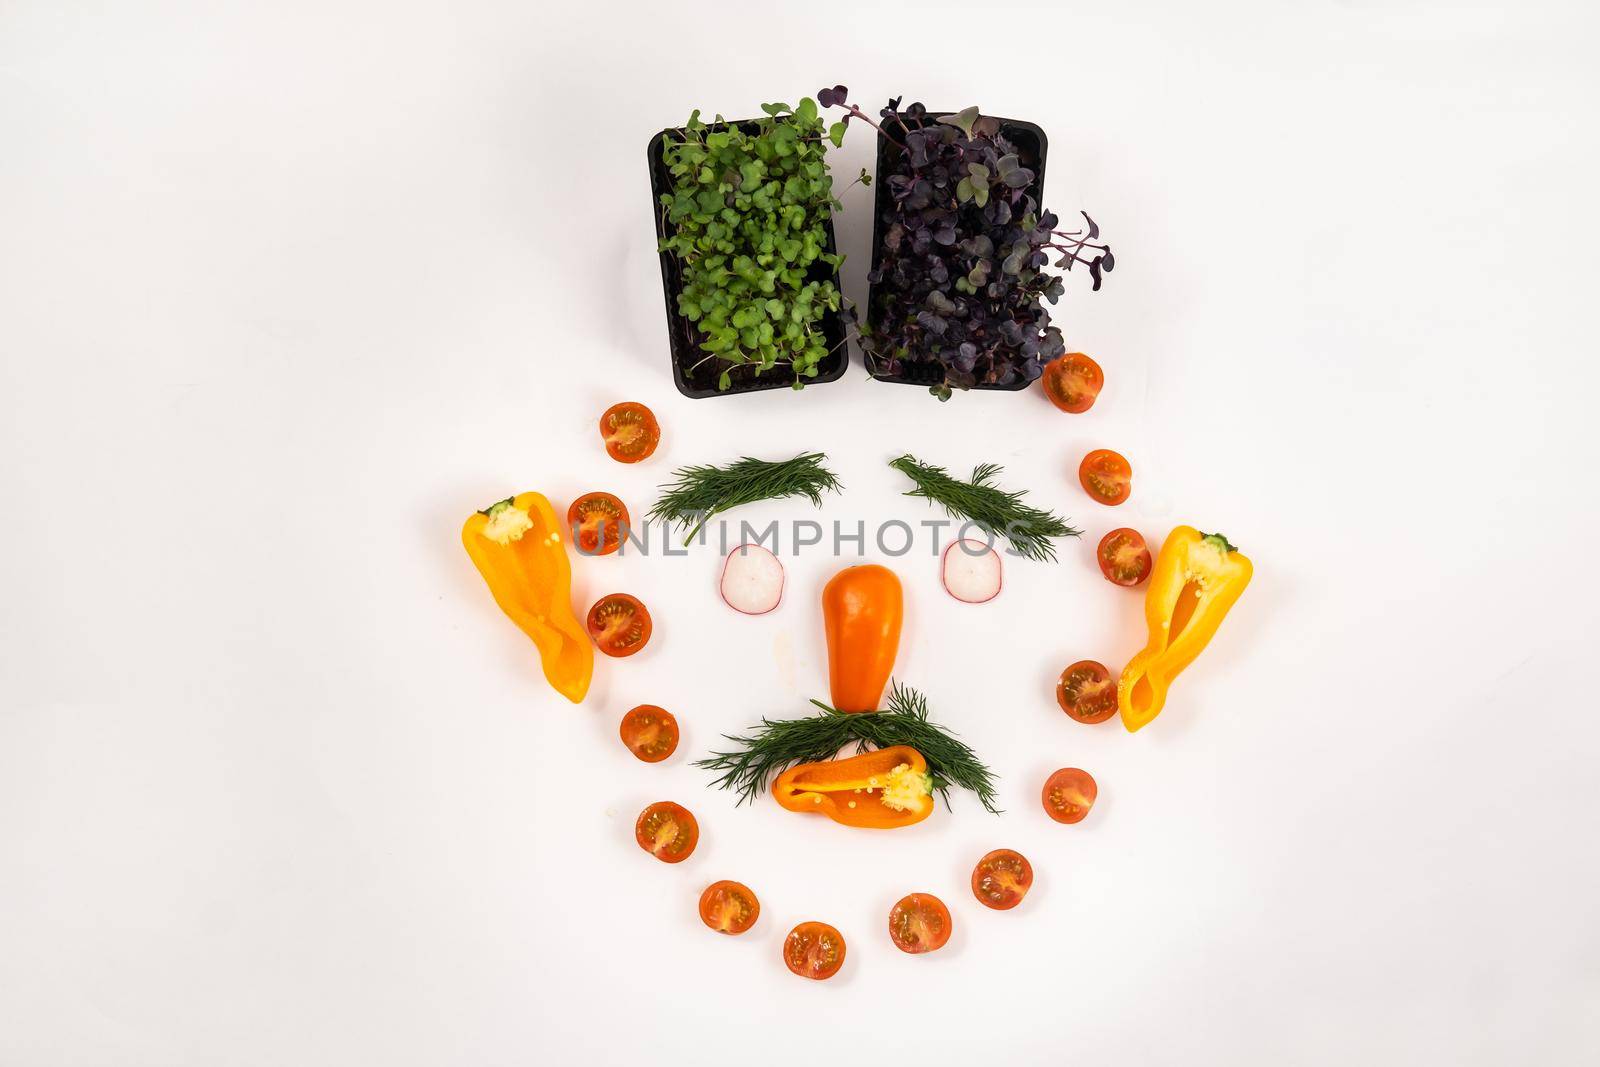 A person's face made of vegetables on a white background.